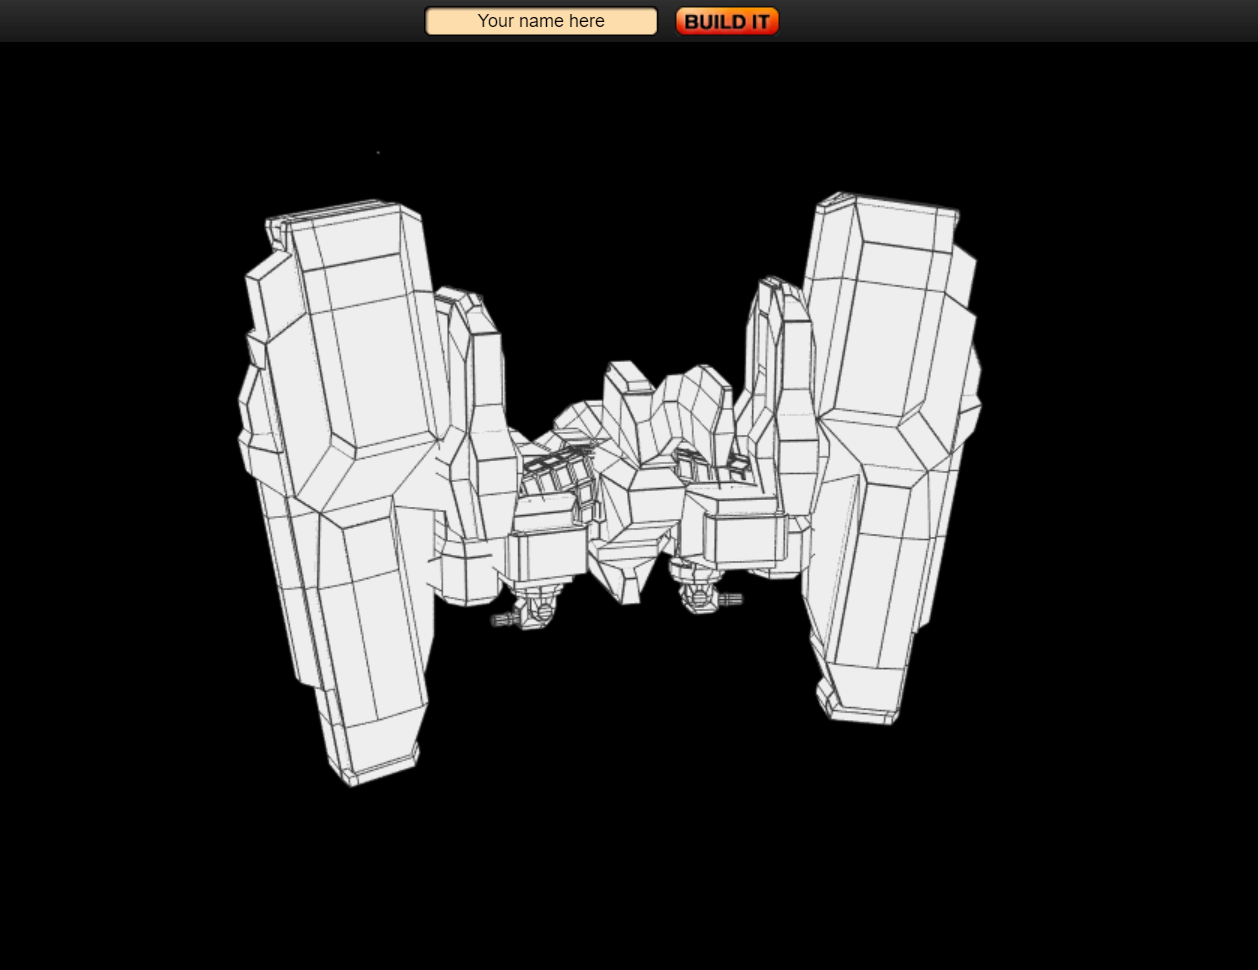 Generate your own spaceship